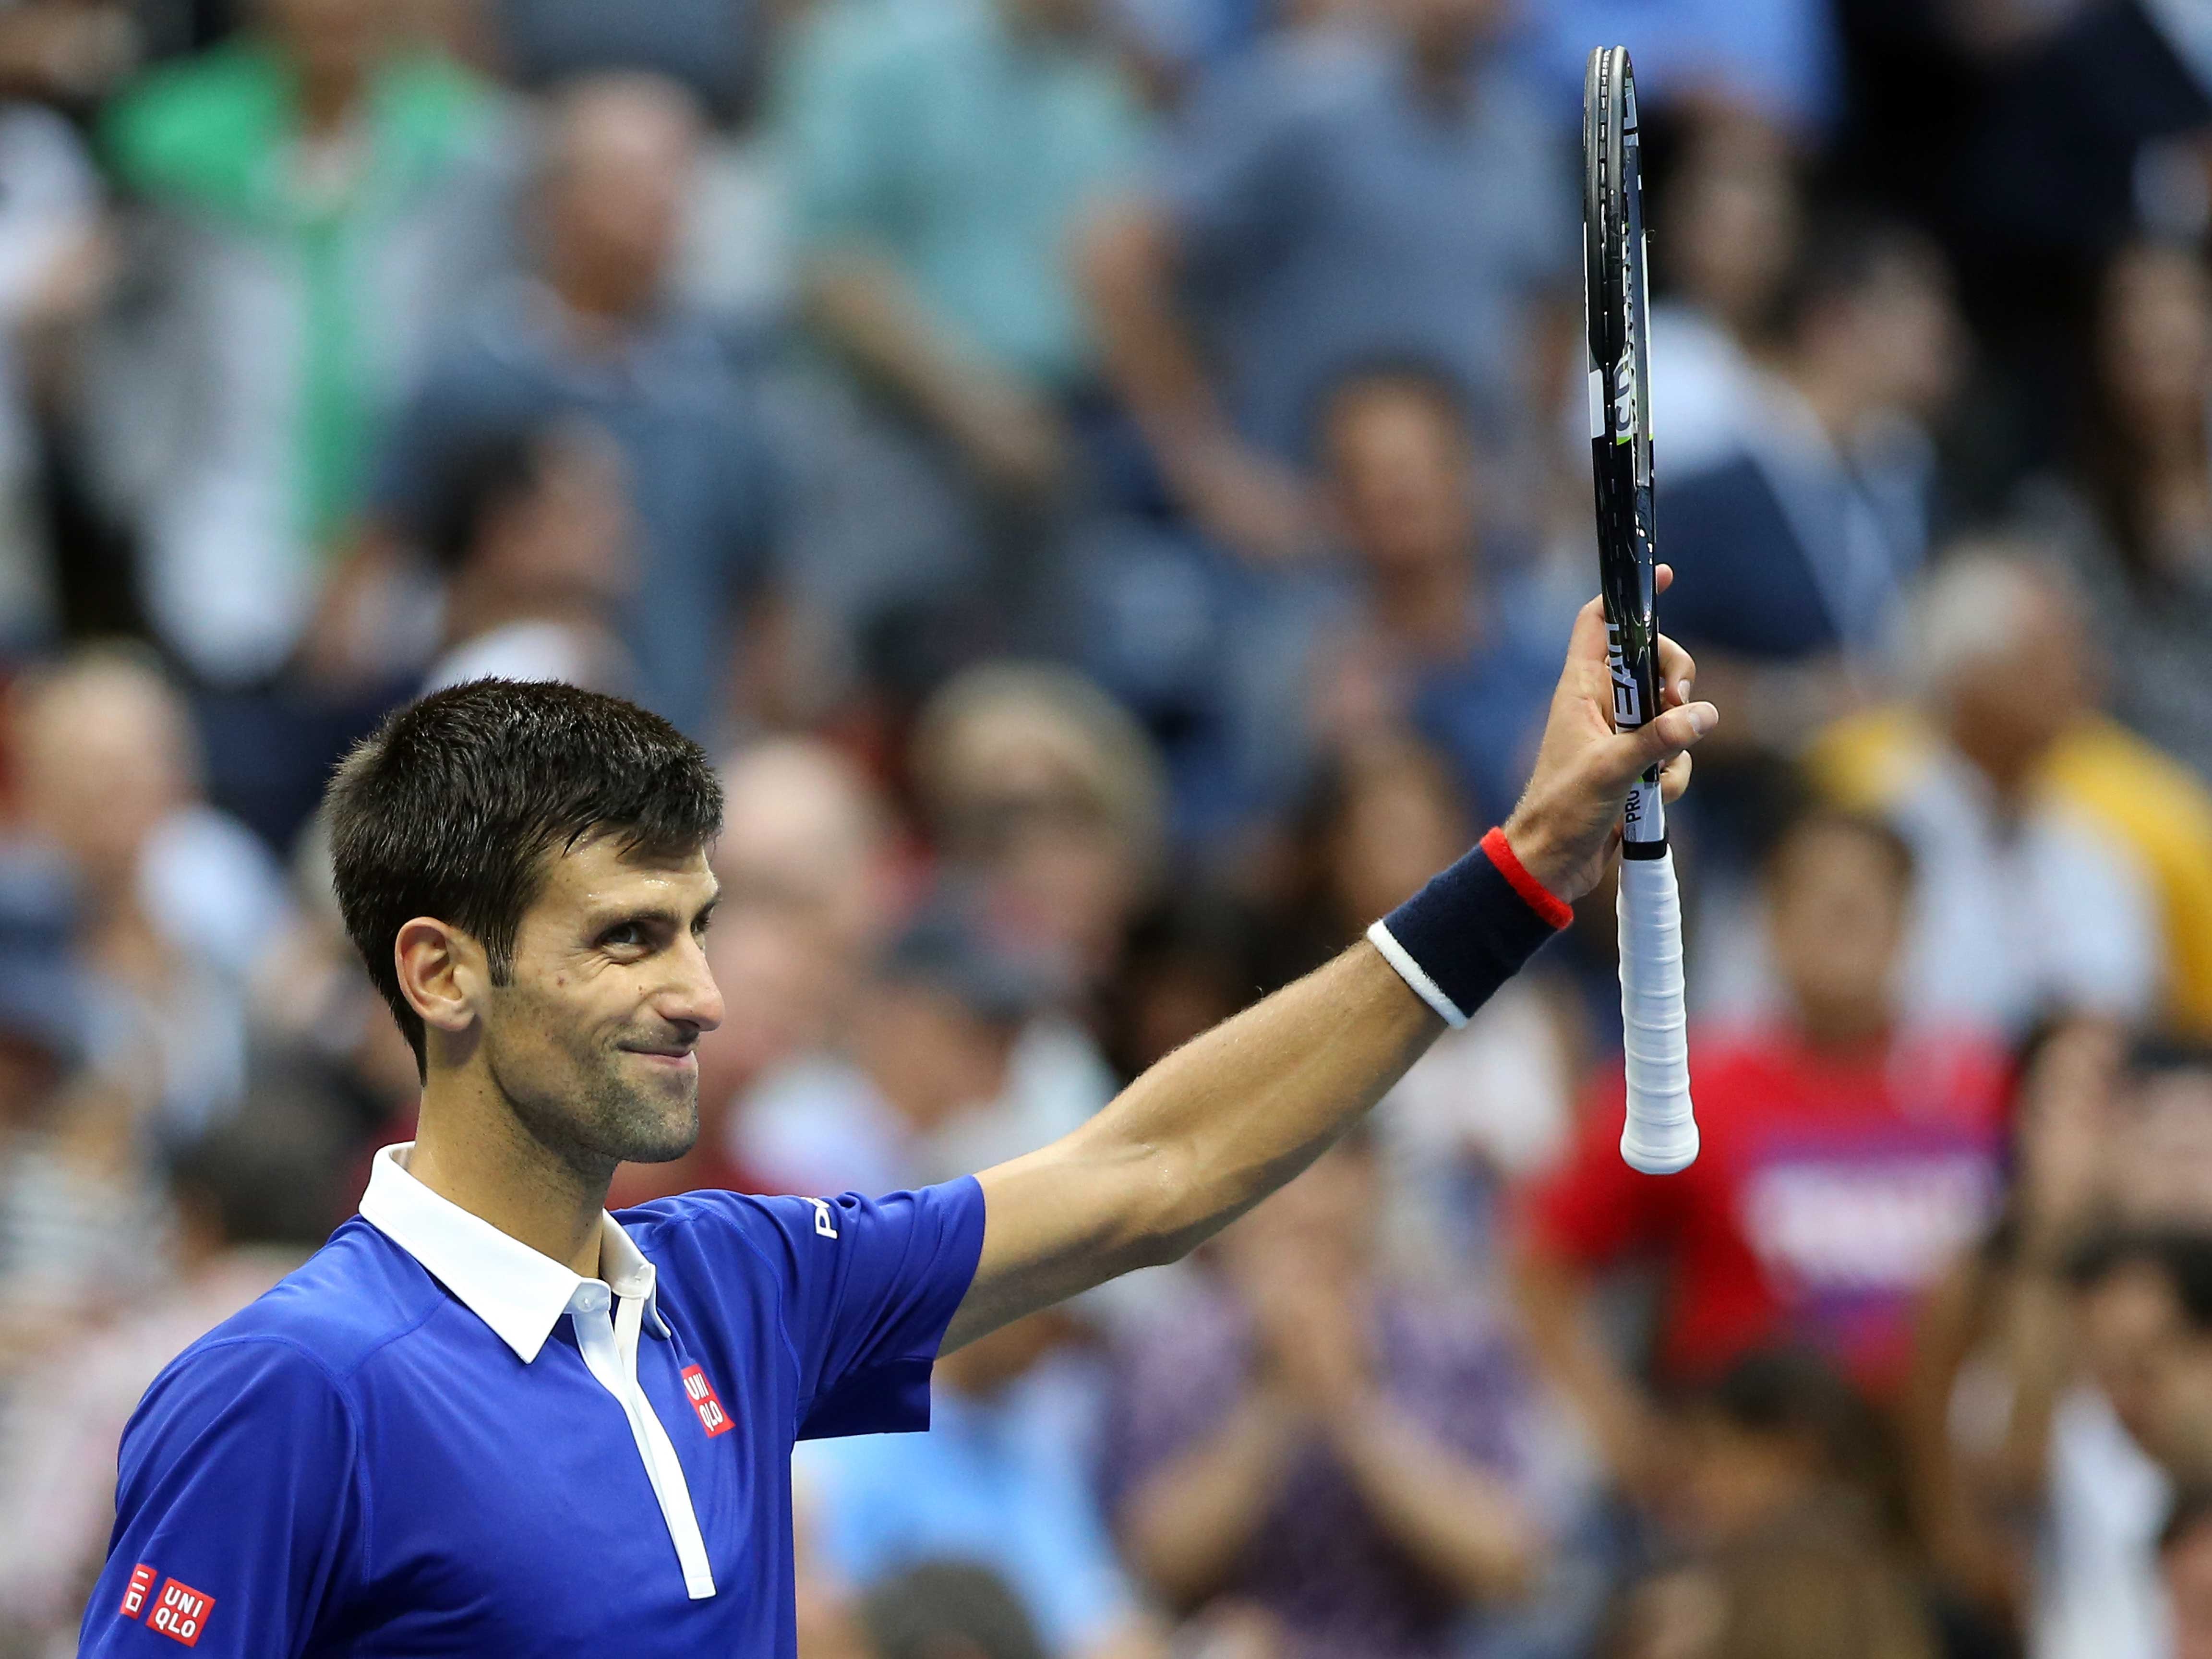 The loss of just three games is a new record for a grand slam semi-final set at the US Open